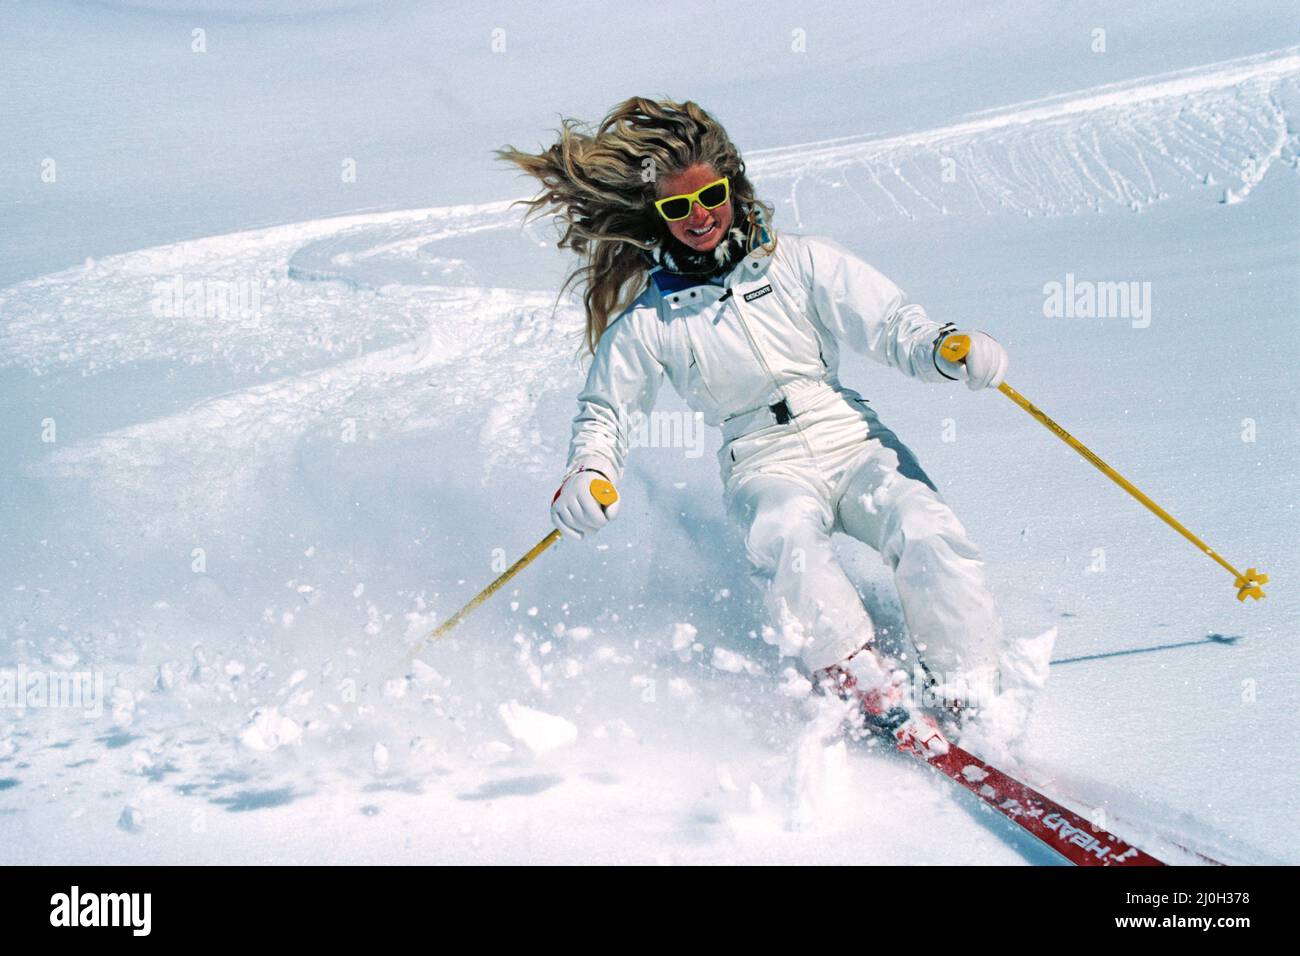 New Zealand. Snow skiing. Young woman downhill skiing. Stock Photo